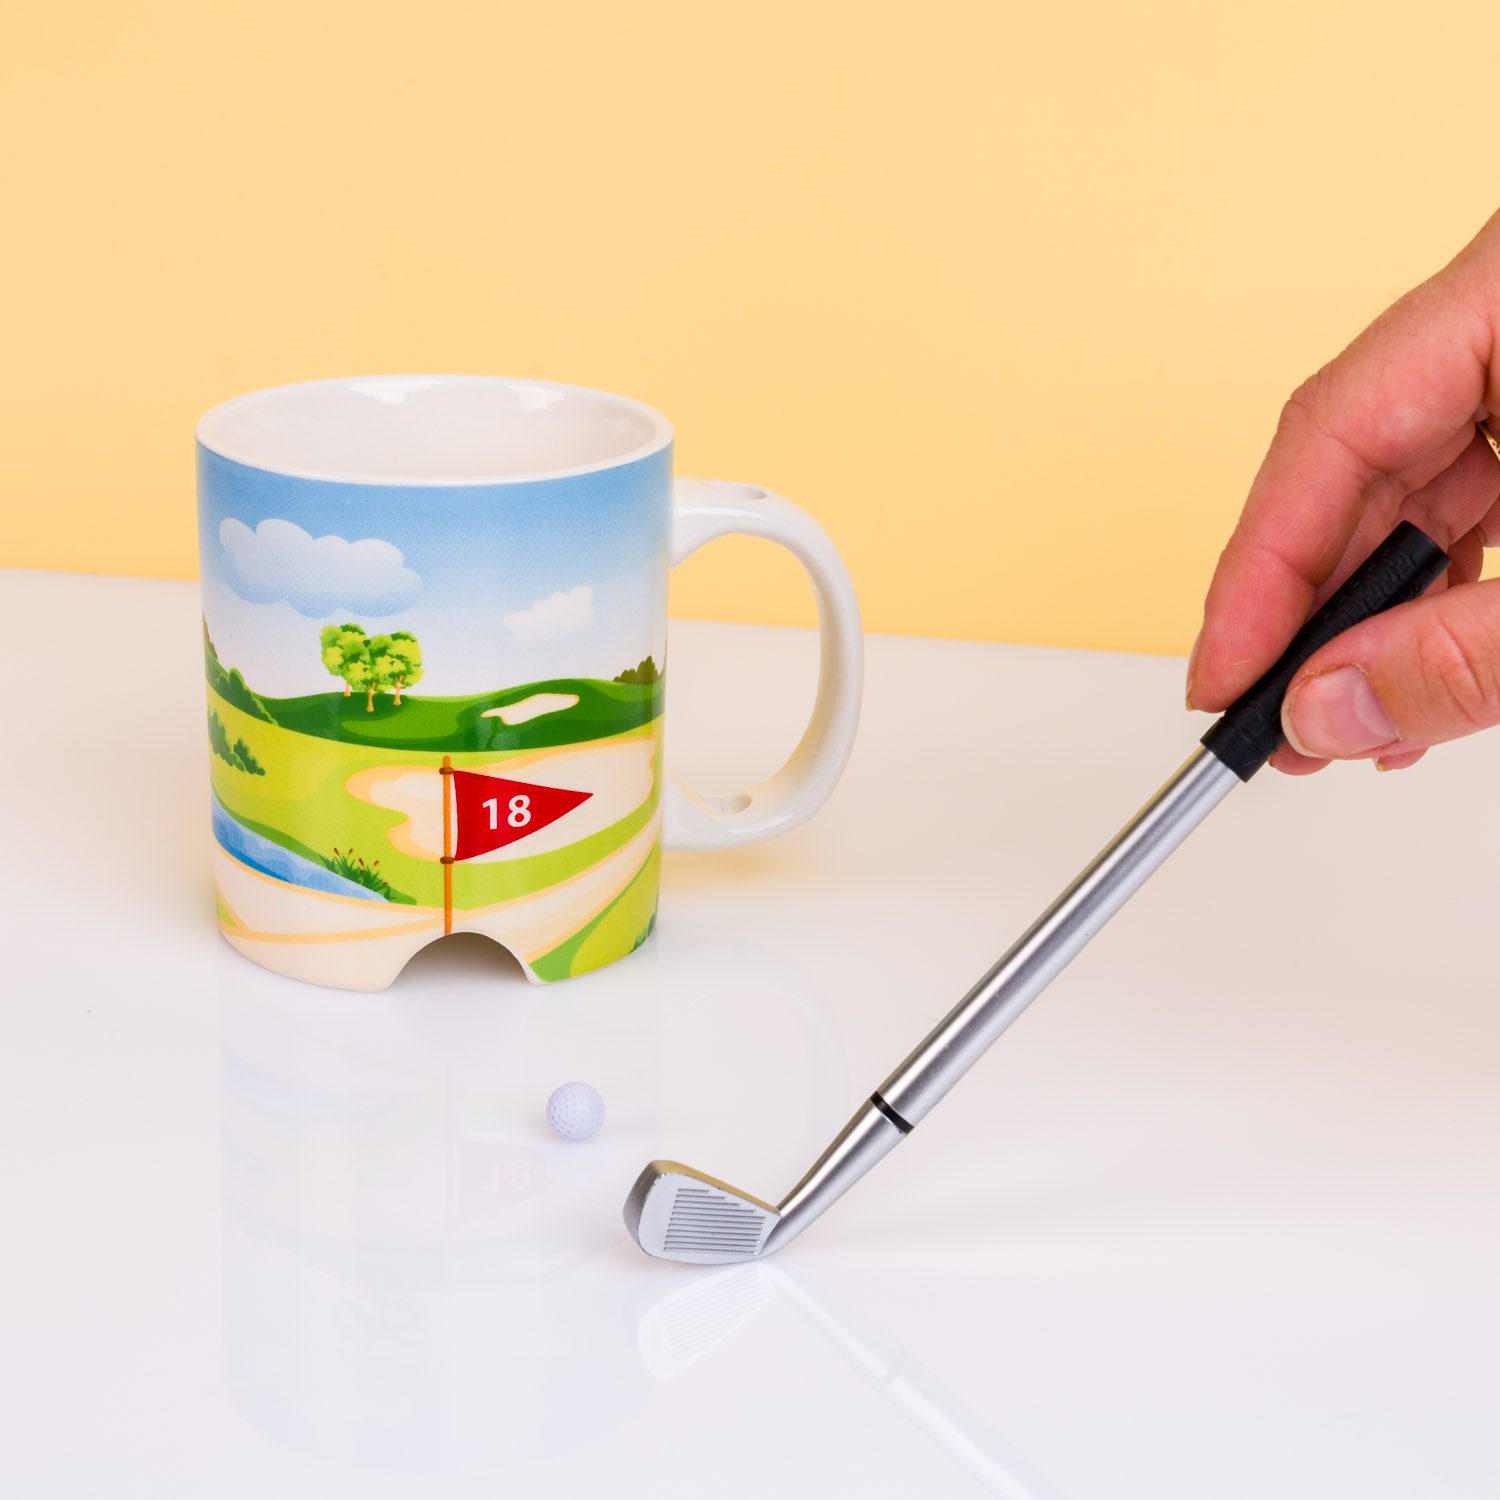 811706-Out of the blue-Mug, Golf Course, With gold club pen & golf ball-3